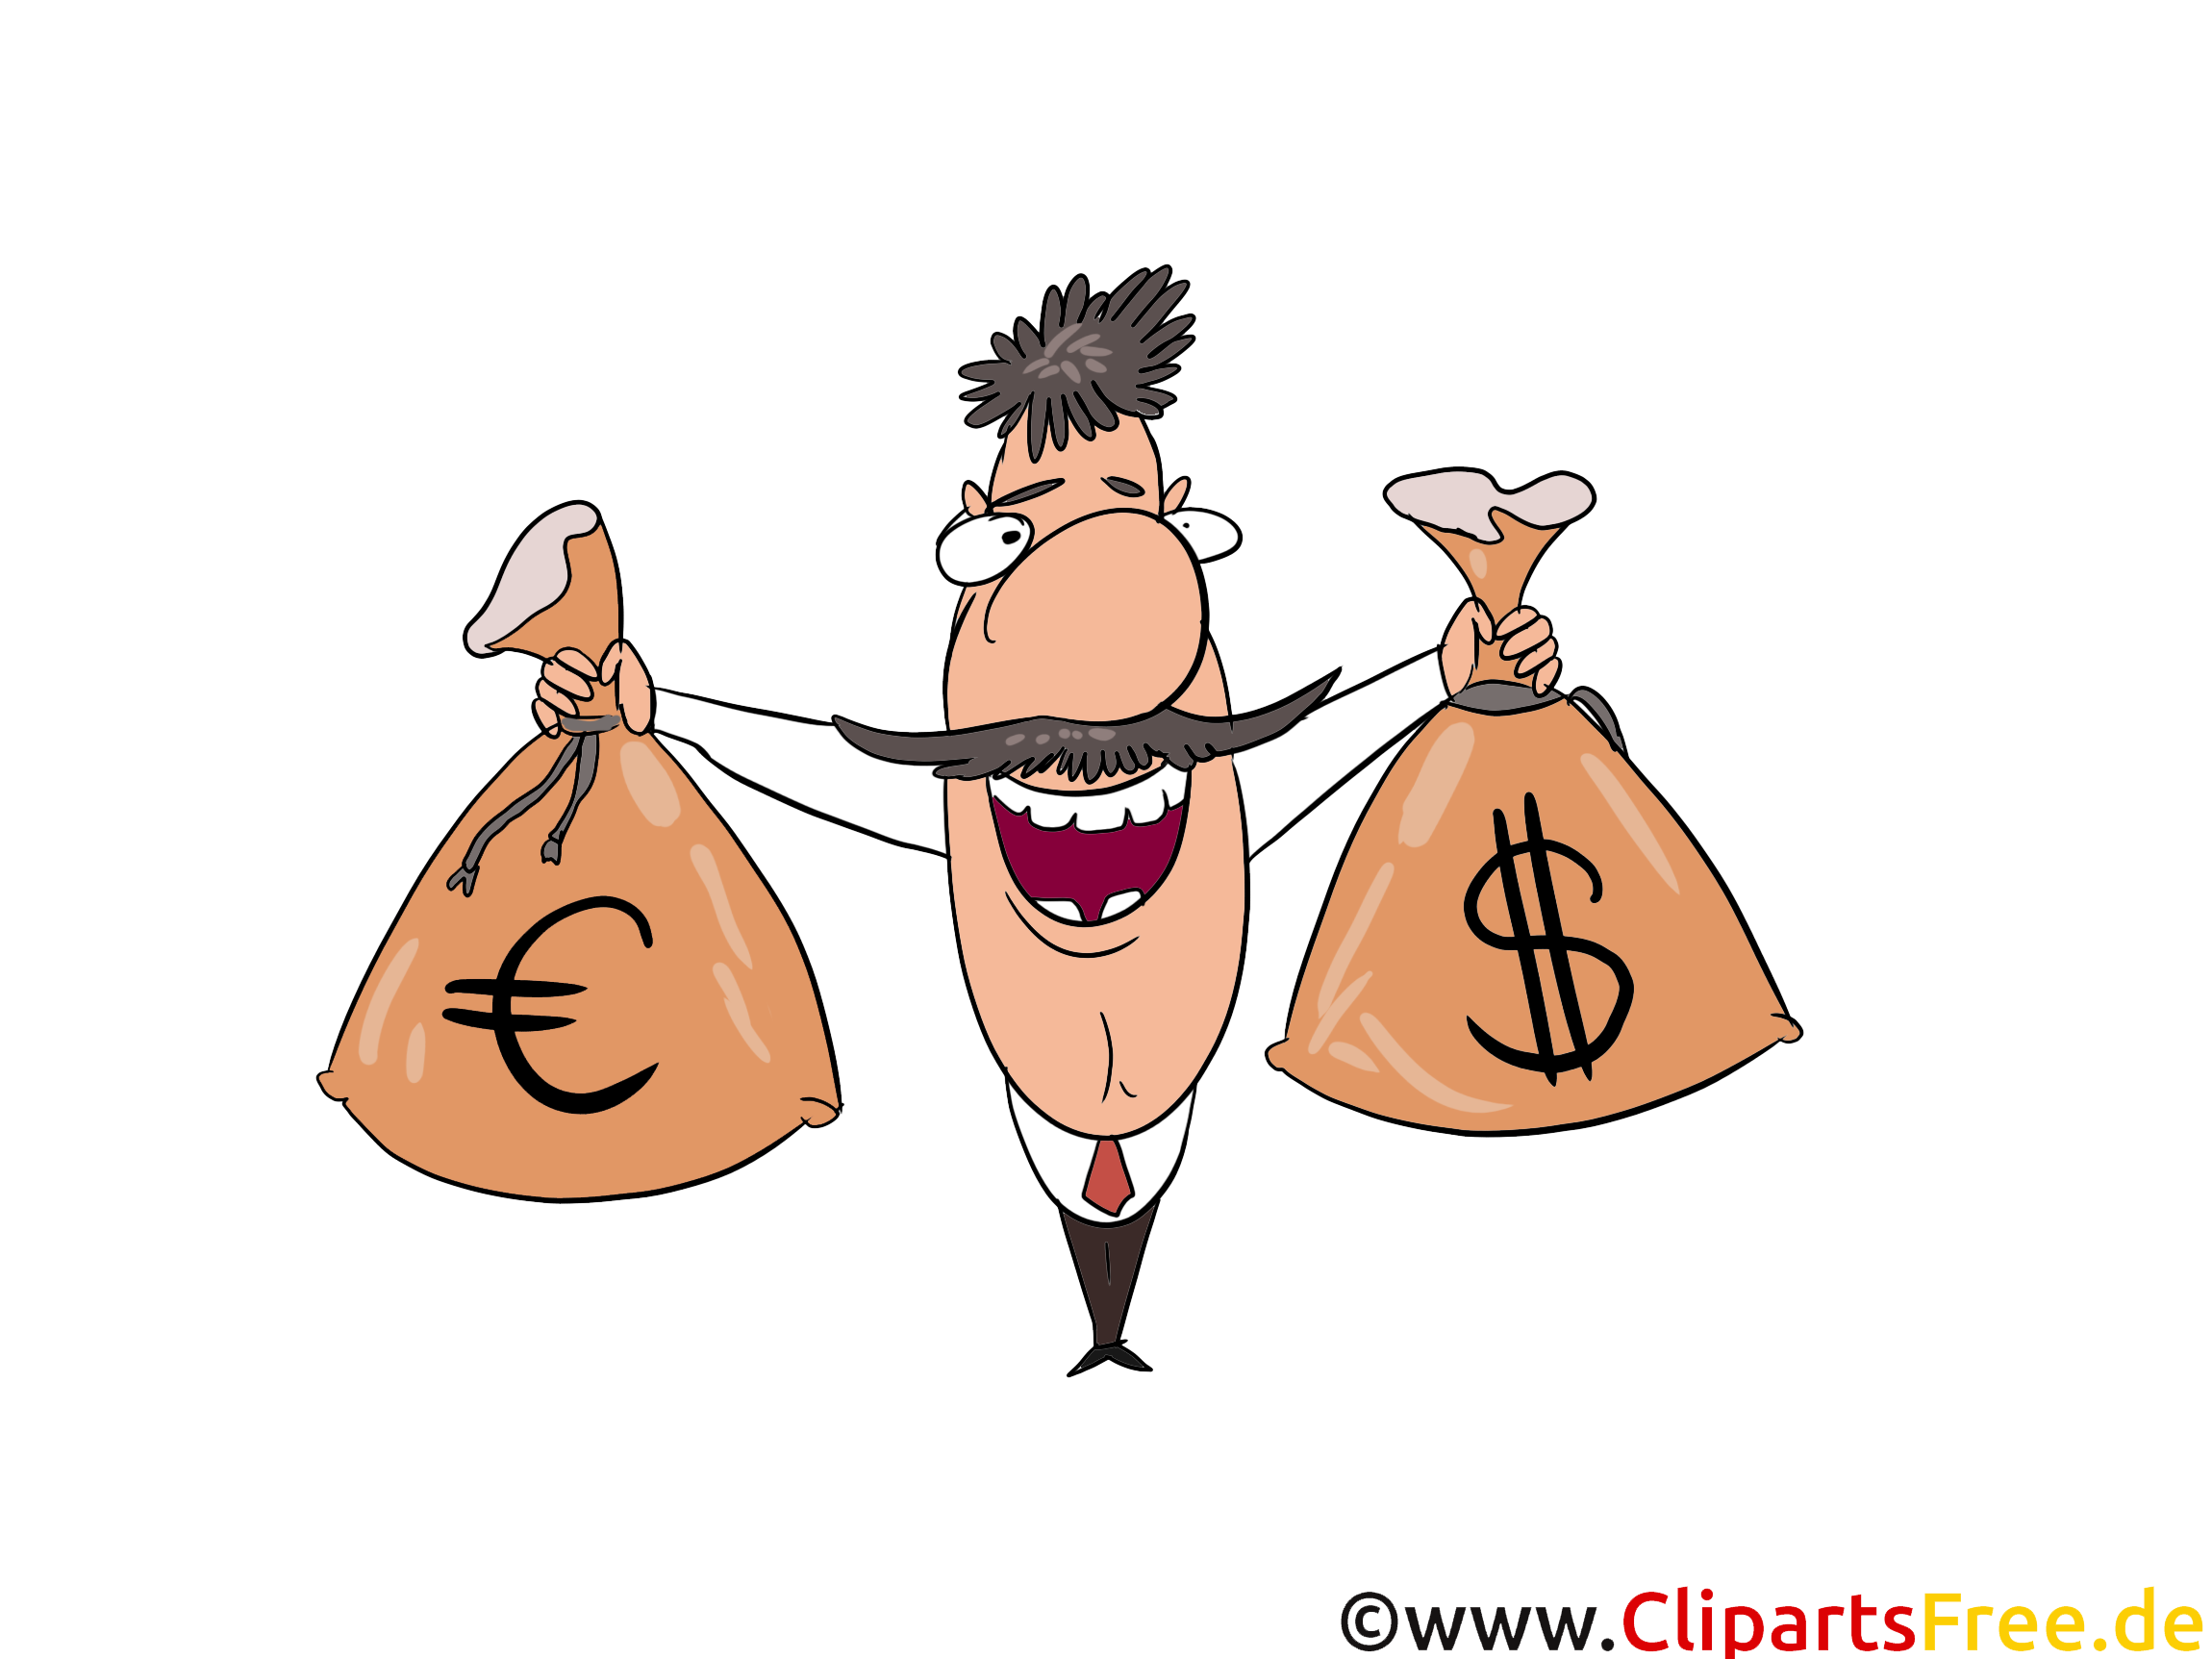 euro currency clipart - photo #19